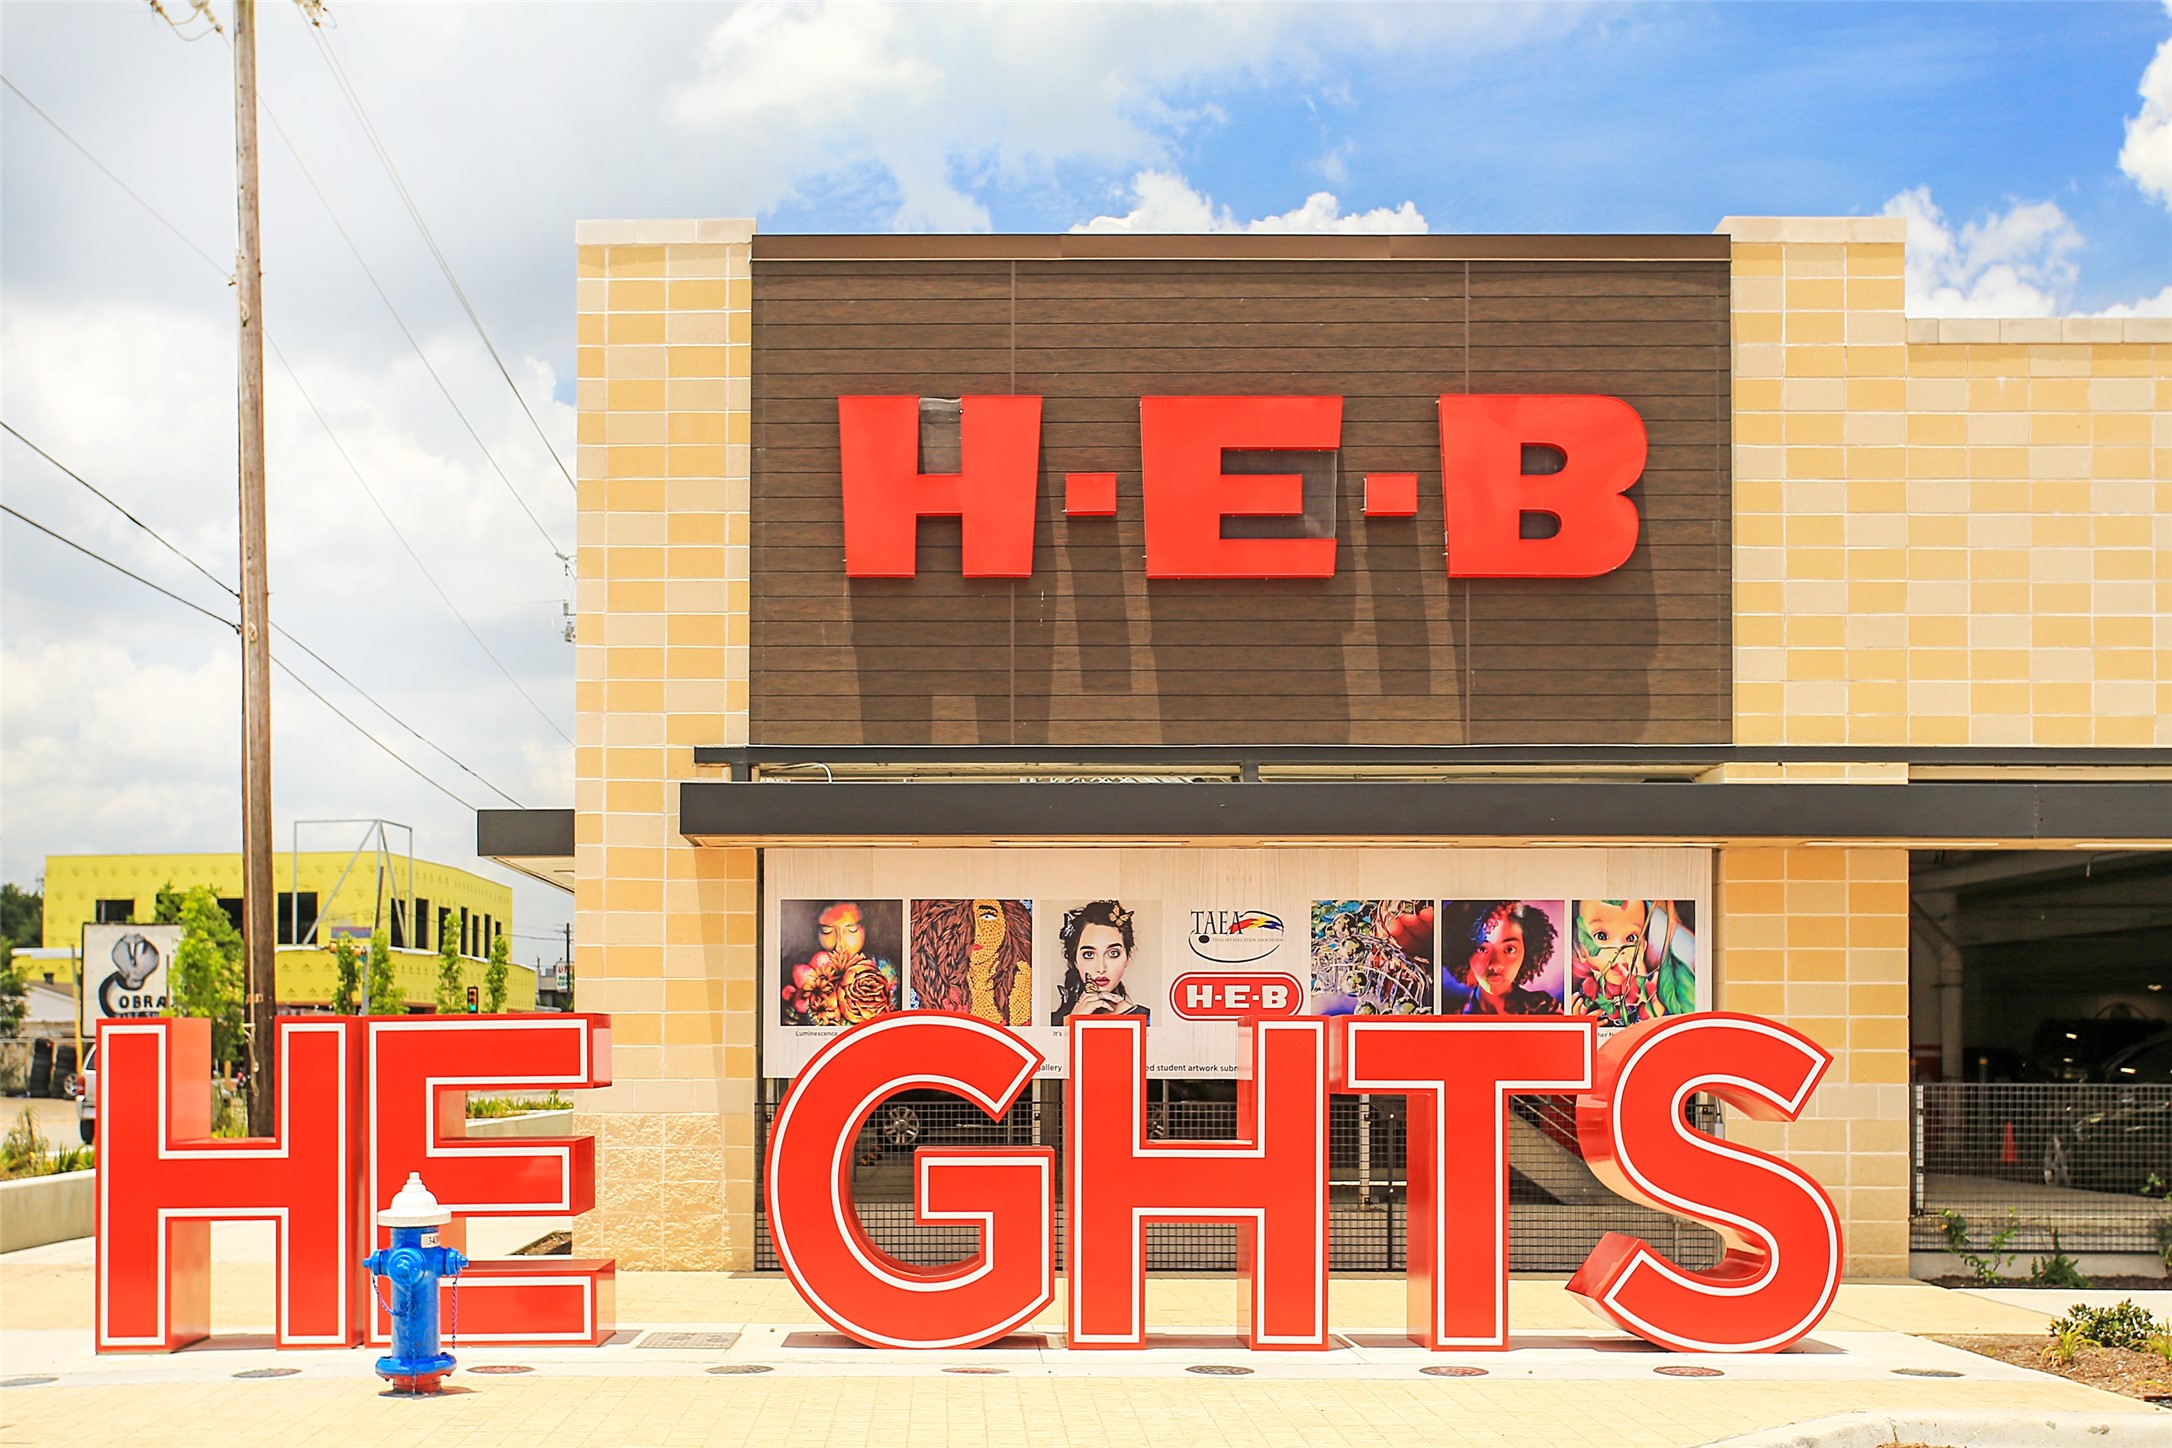 The Heights HEB is located at Shepherd, between 23rd & 24th Street.